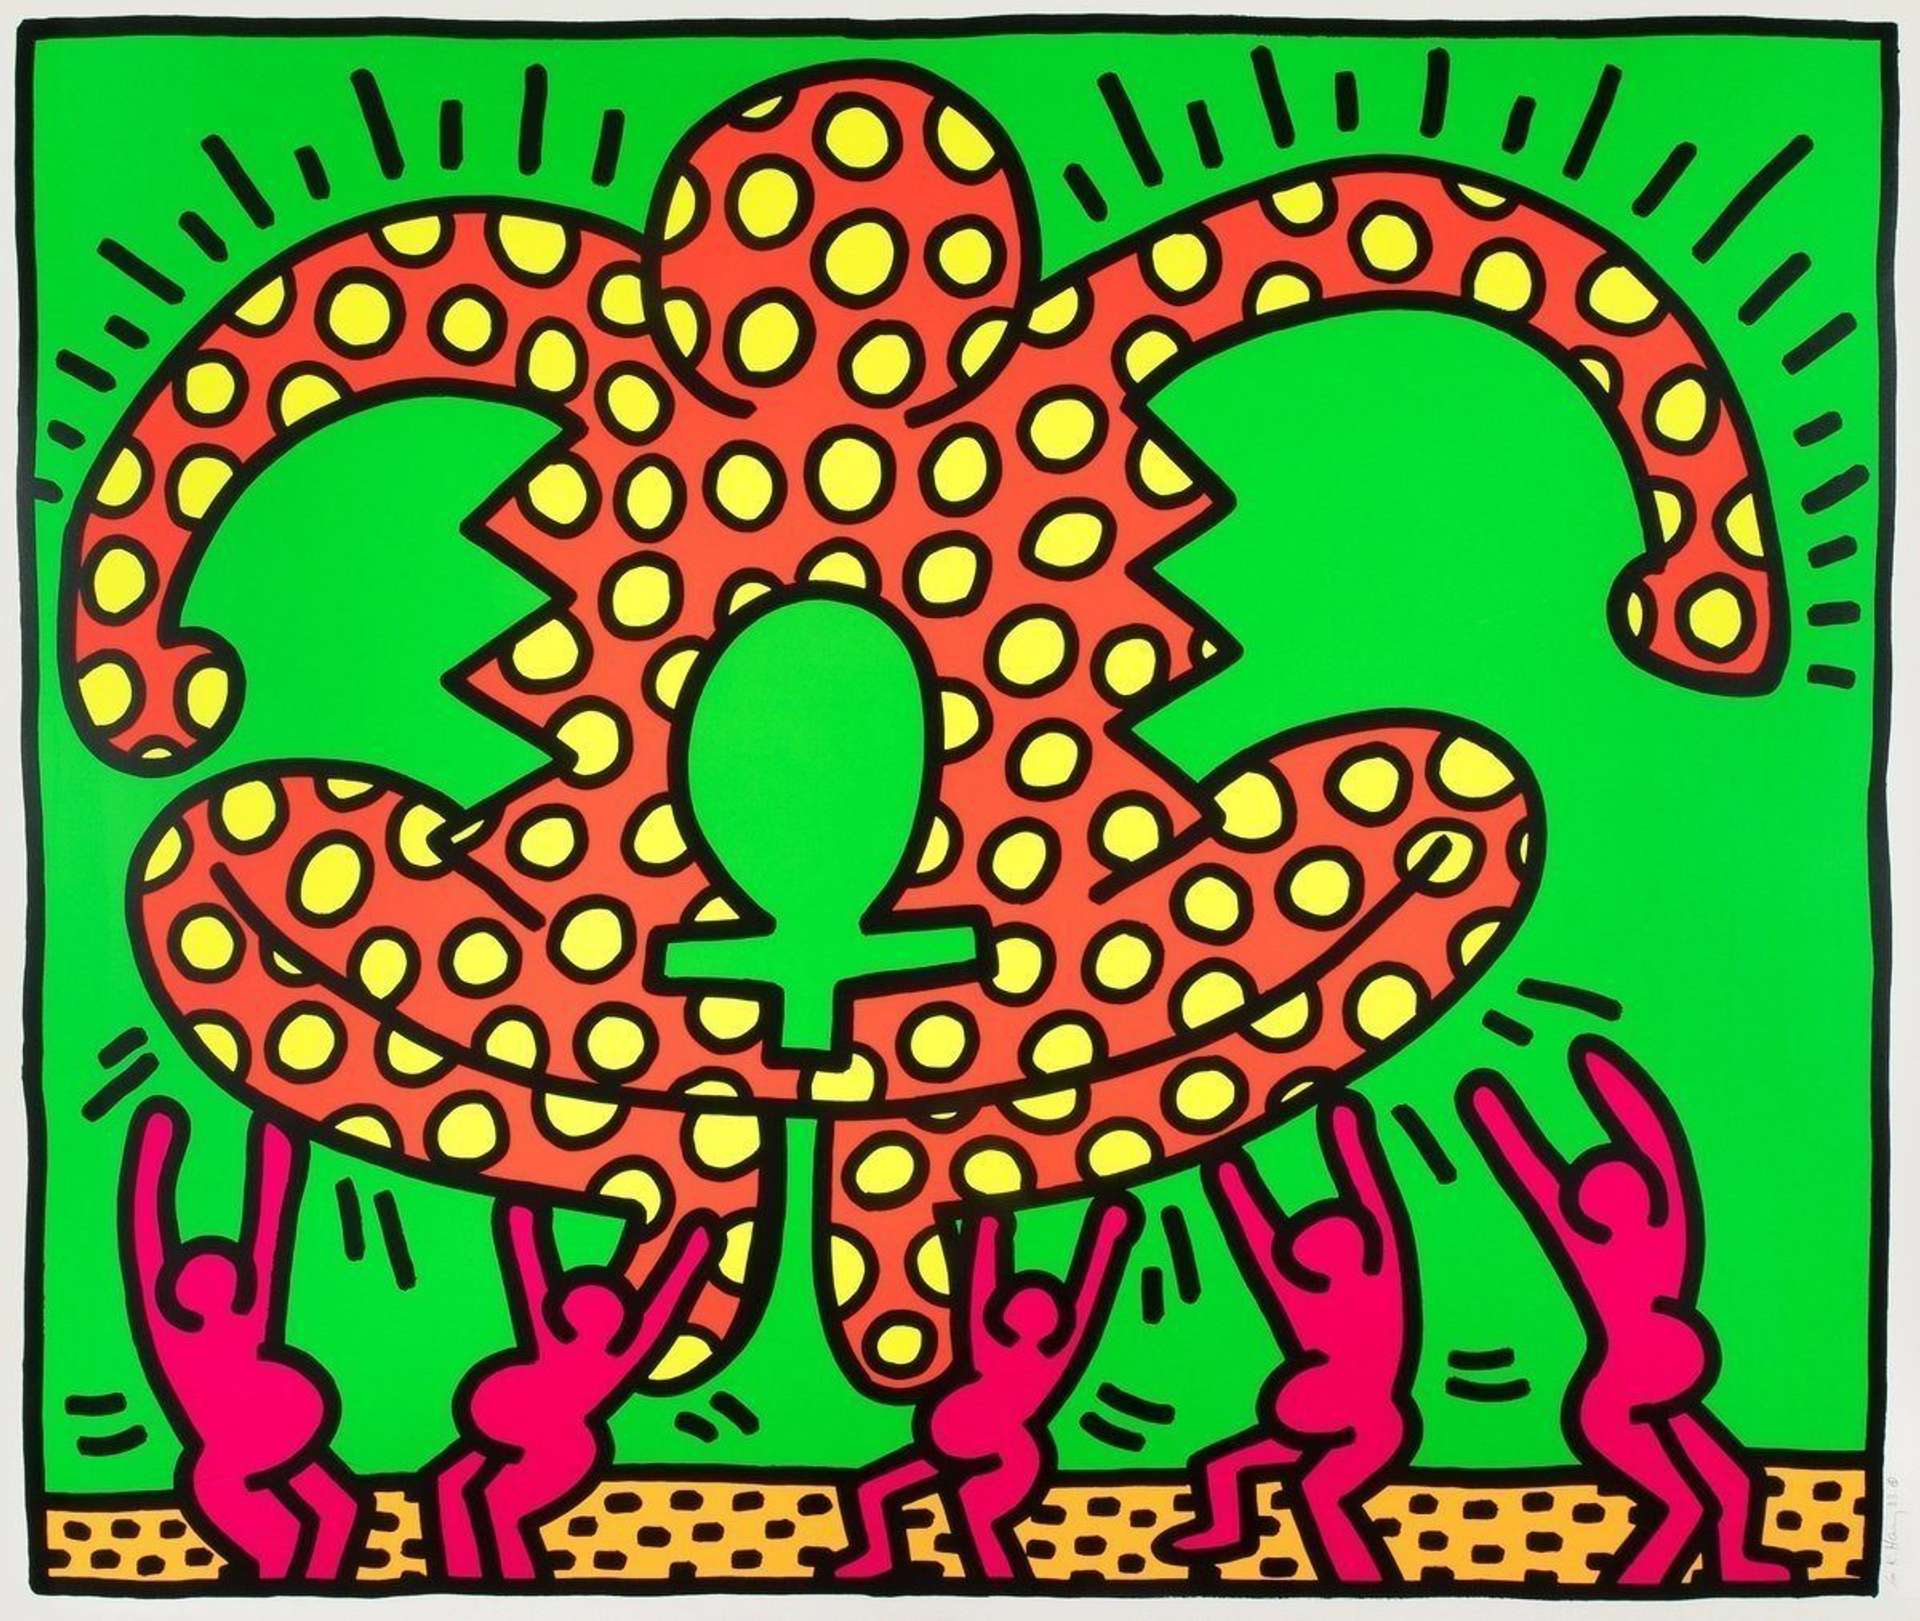 Fertility 5 by Keith Haring